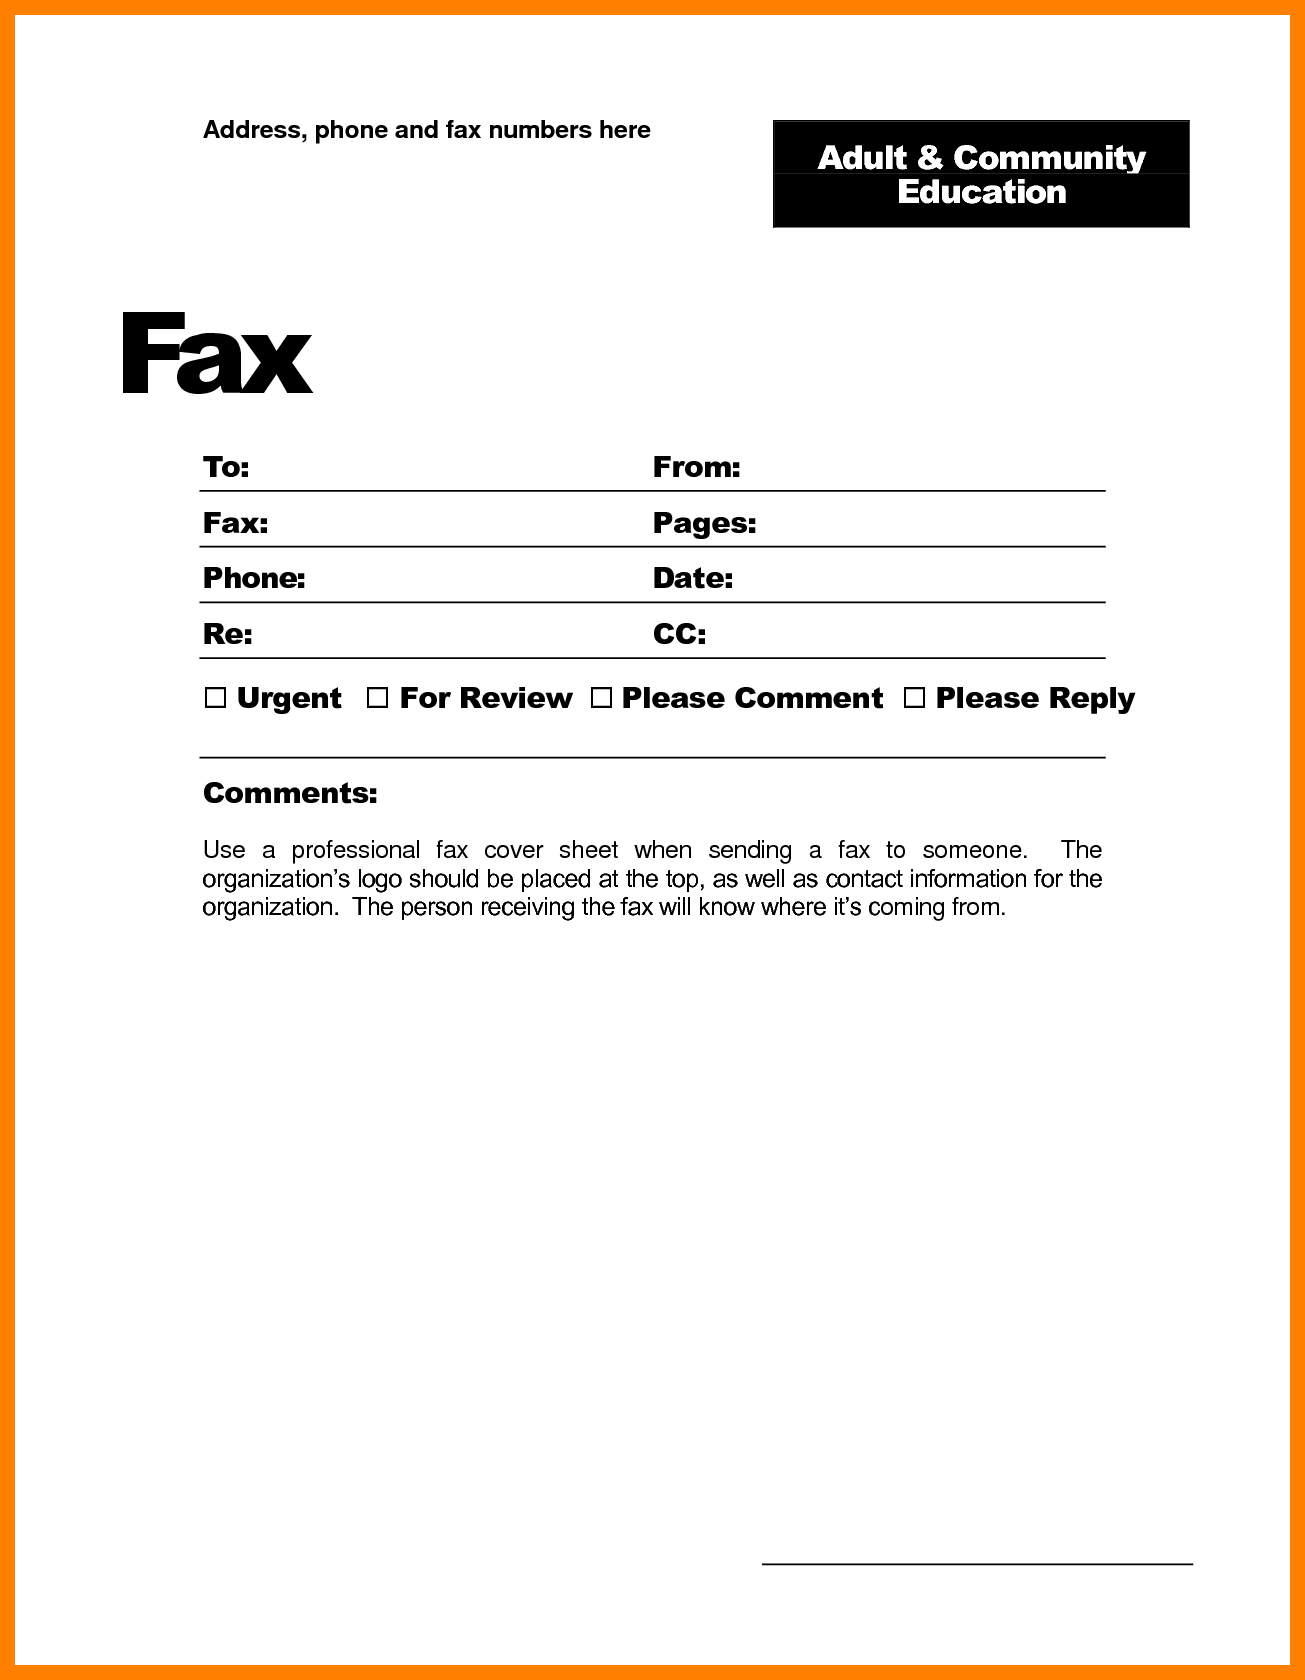 fax-cover-sheet-download-free-fax-cover-sheet-professional-personal